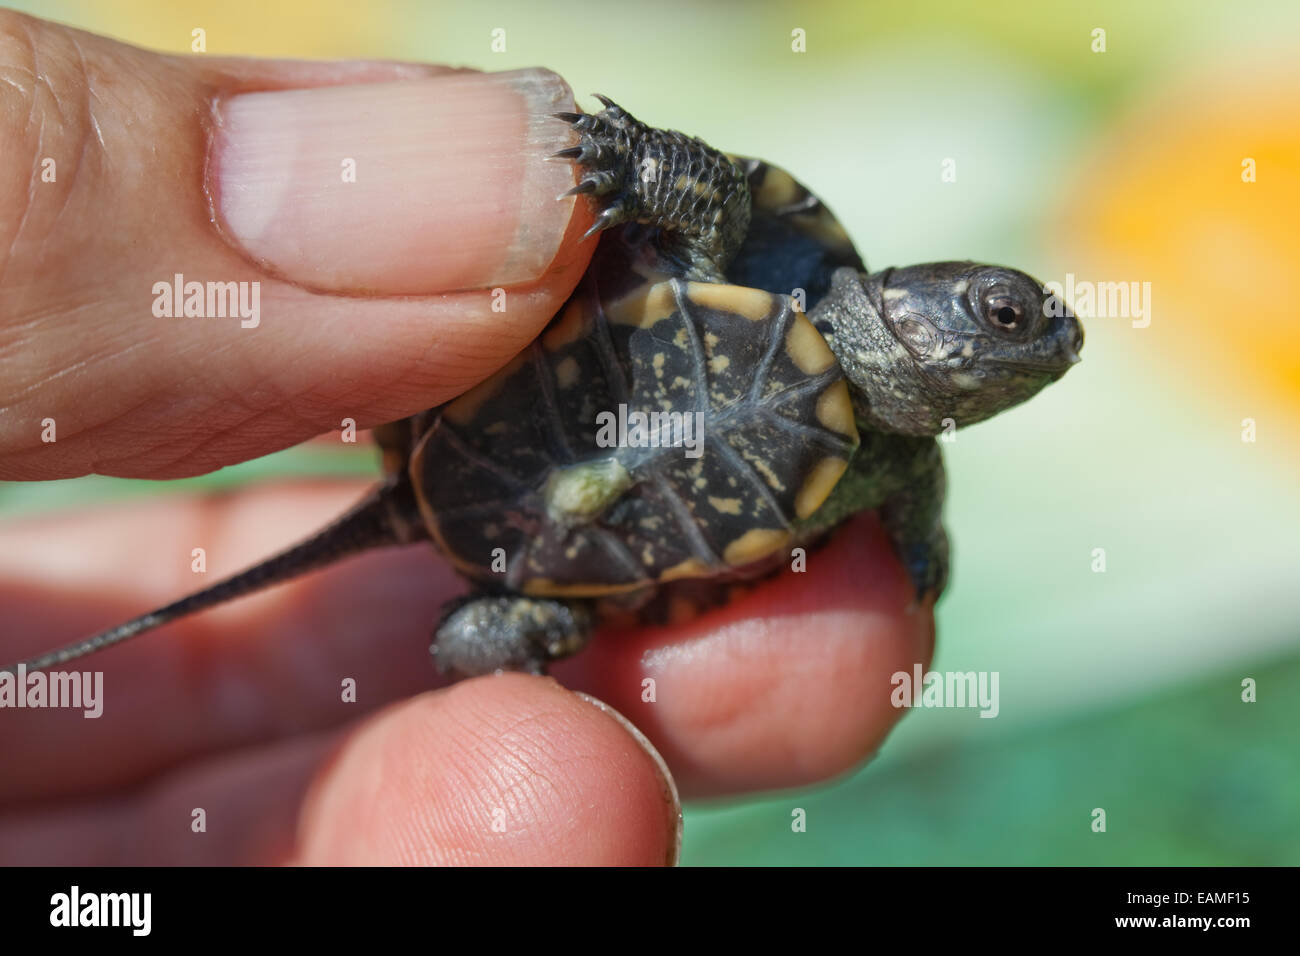 European Pond Turtle (Emys orbicularis). Hatchling held in a hand showing undershell or plastron and nearly closed umbilicus. Stock Photo